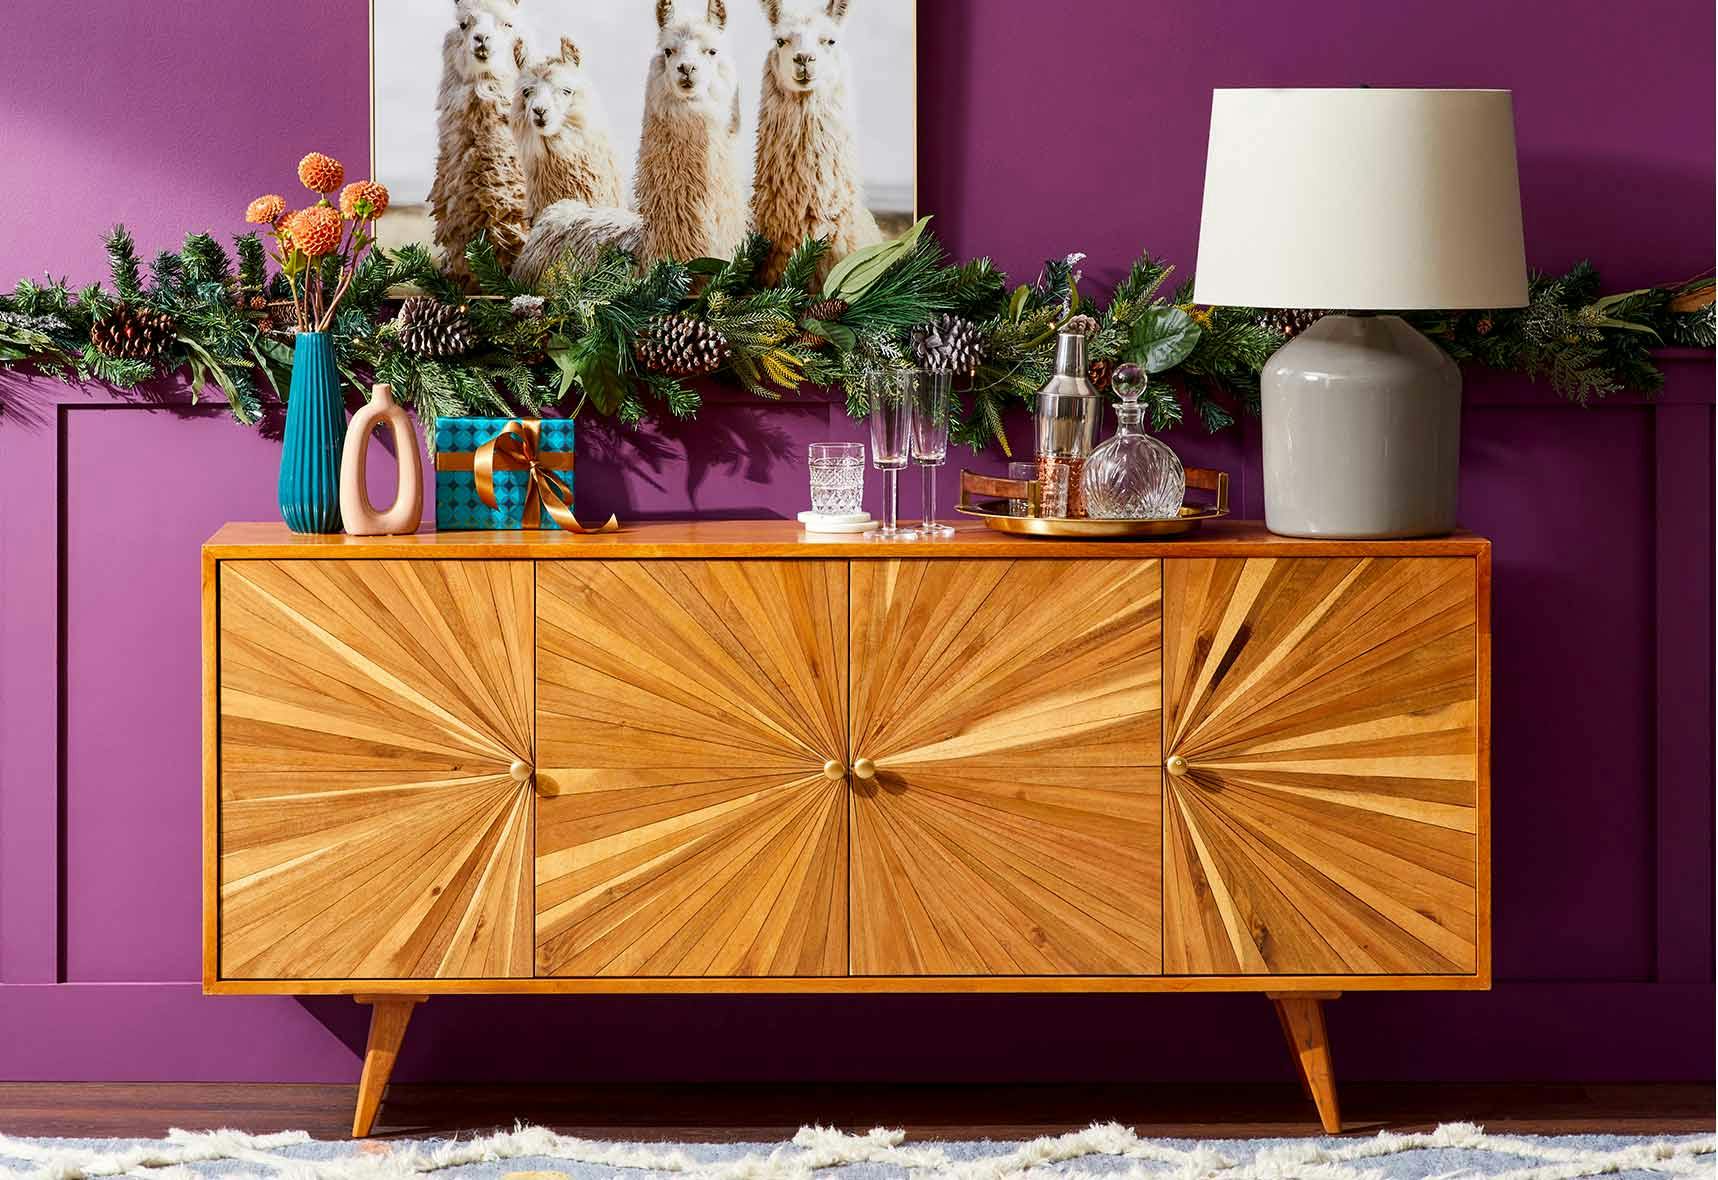 Brown wooden console table with christmas decorations against a purple wall.